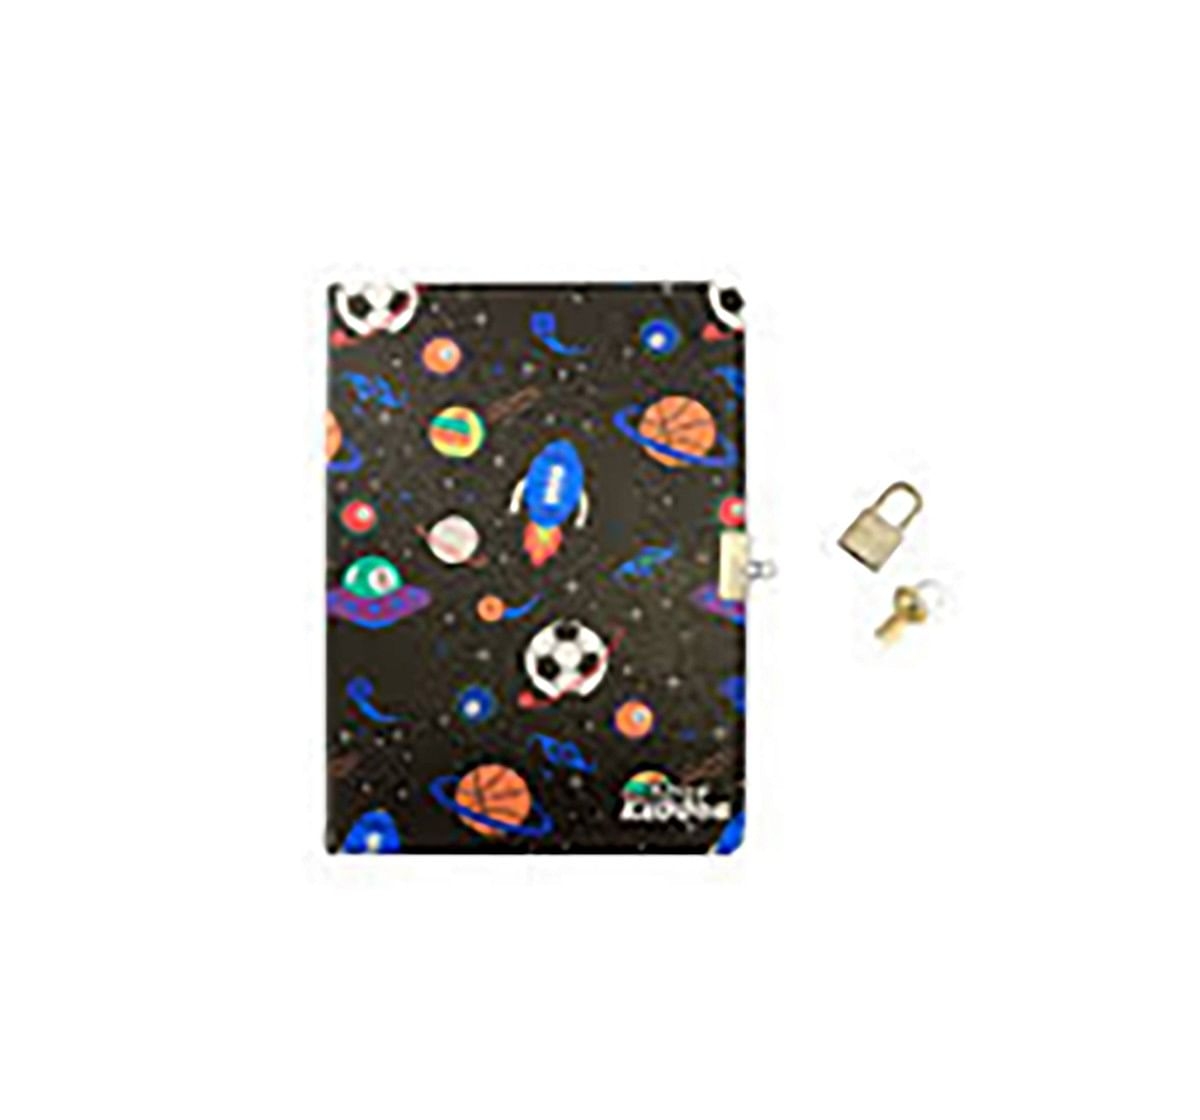 Smily Kiddos Lockable Notebook -Study & Desk Accessories for Kids age 3Y+ (Black)